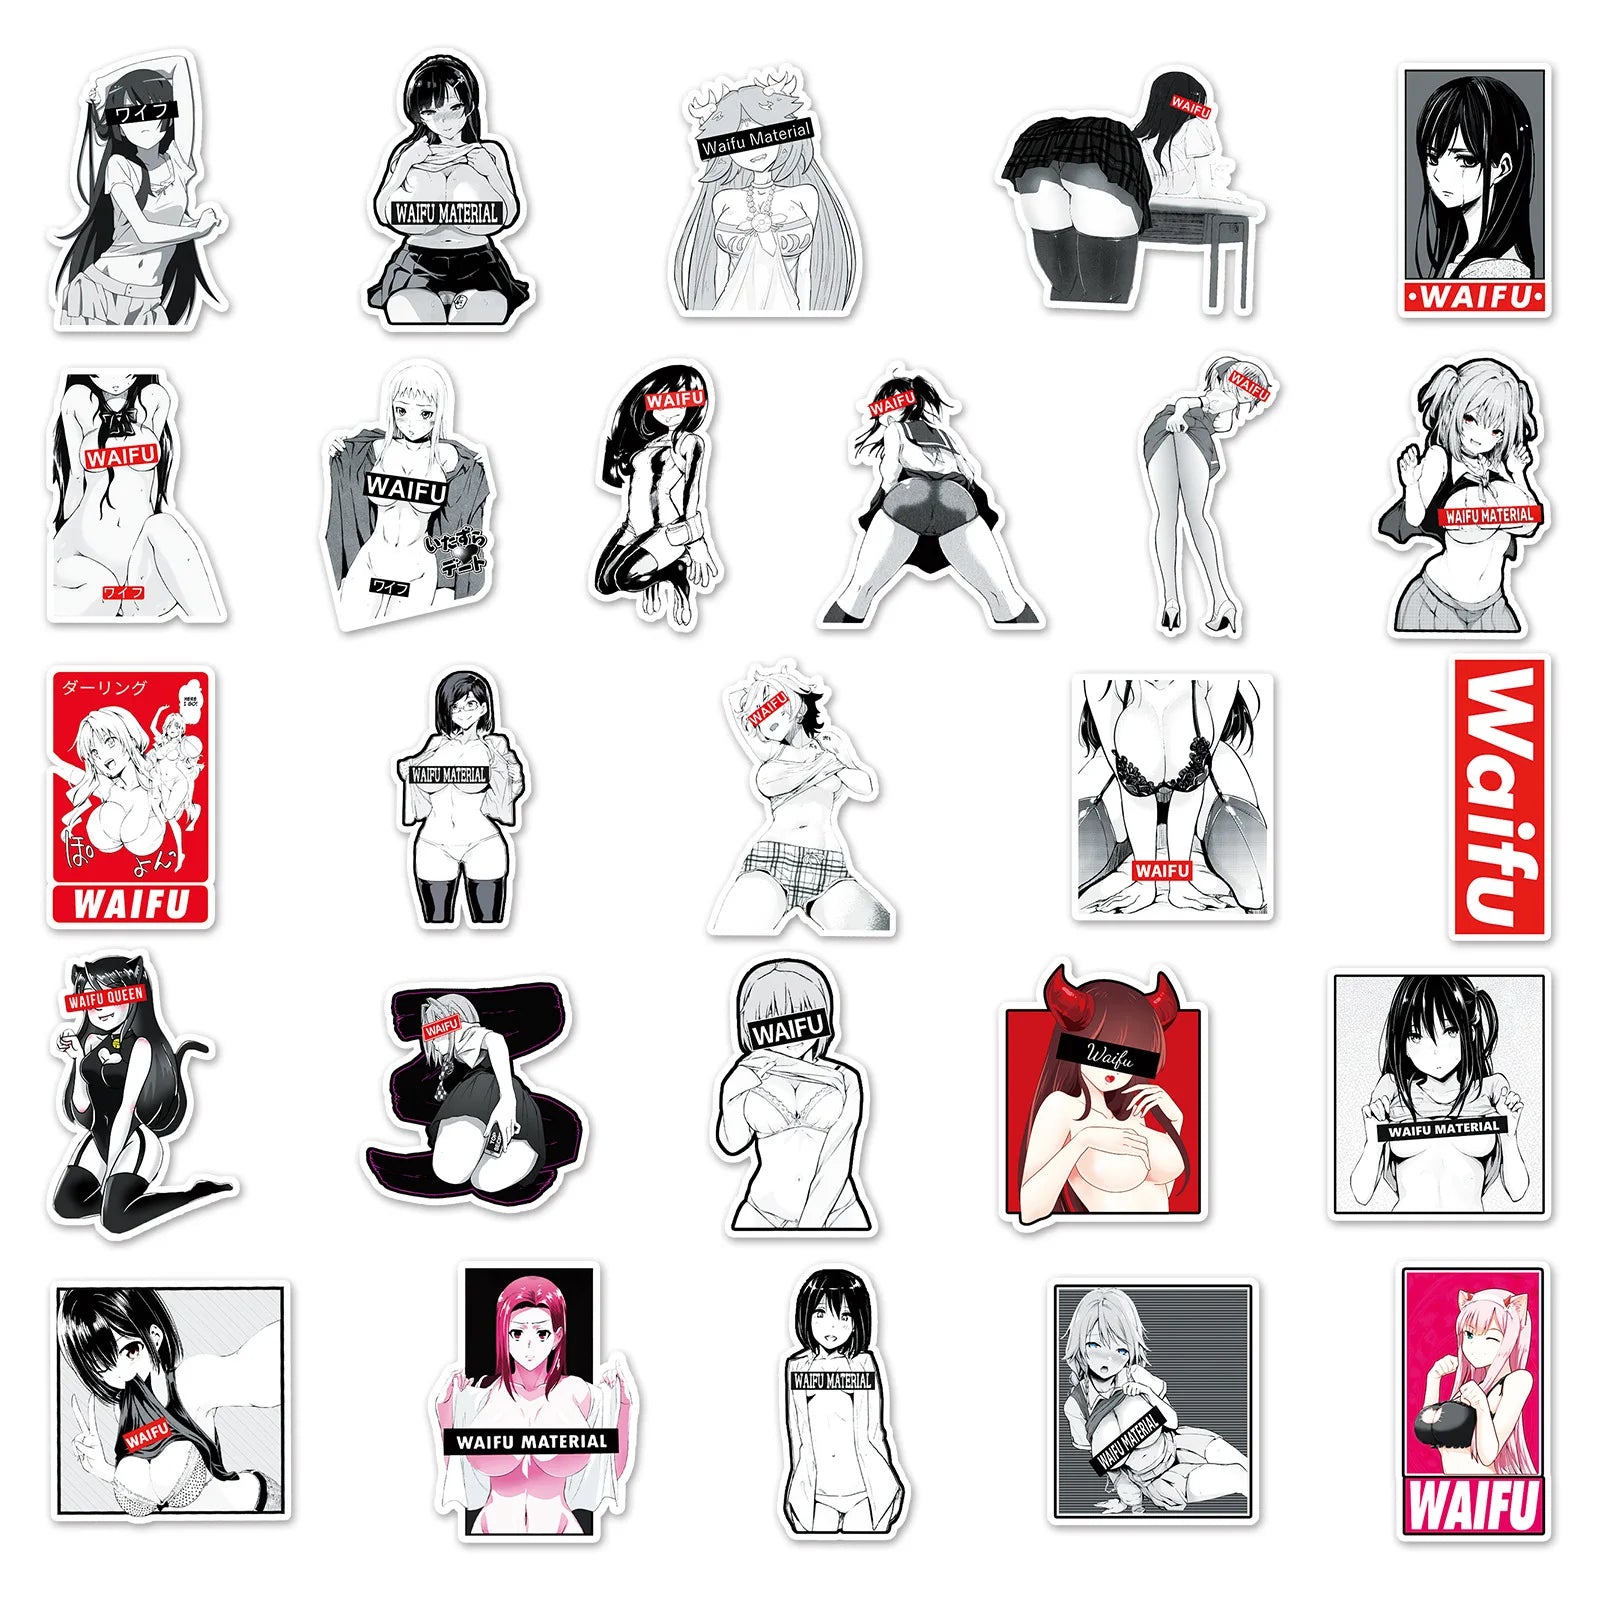 Sexy Waifu Girl Stickers - 10/30/50/101PCS - Hentai Adult Anime Decals - Kawaii Stop - Adult Stickers, Allure, Anime Decals, Car Stickers, Edgy Fashion, Hentai Stickers, Laptop Accessories, Mischief, Phone Decals, PVC Stickers, Rebellion, Self-Expression, Sexy Stickers, Skateboard Decoration, Trendy Accessories, Unique Gifts, Waifu Girl, Waterproof Stickers